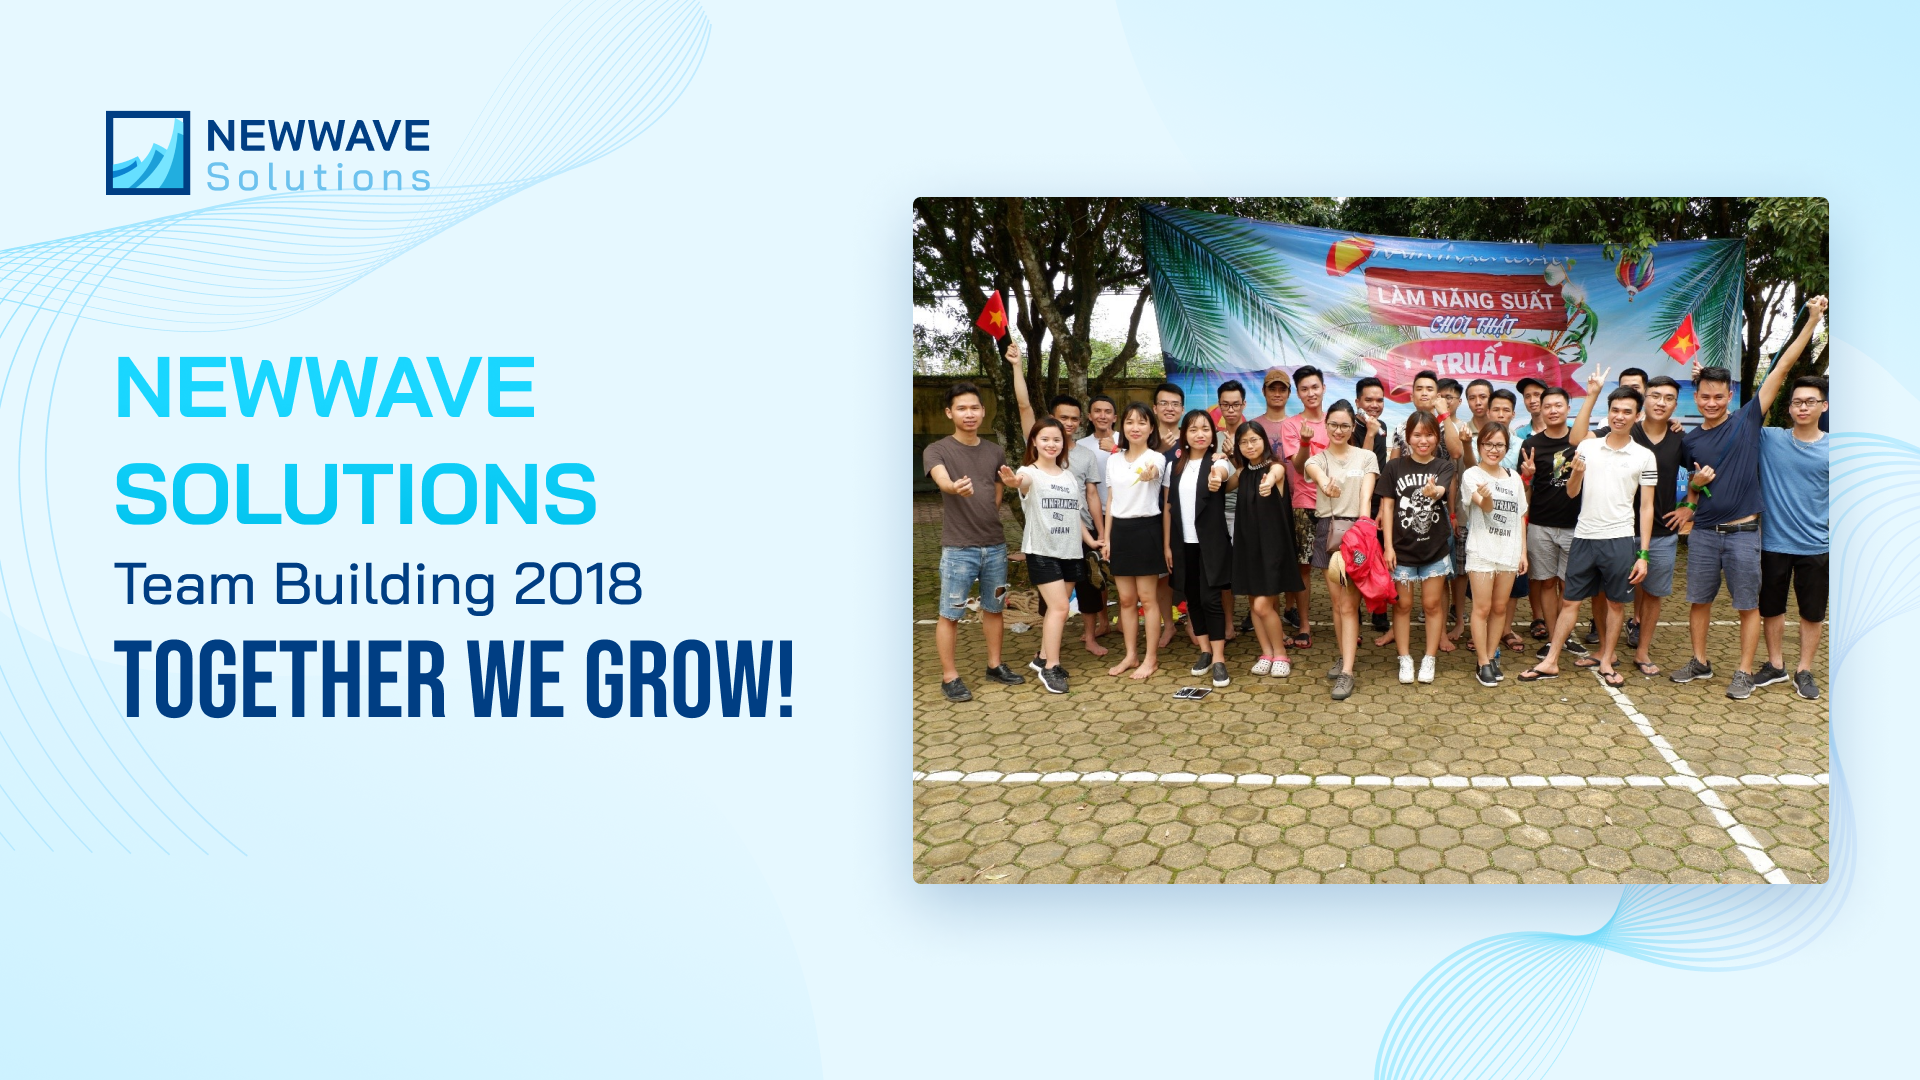 Newwave Solutions Team Building 2018 - Together we grow!